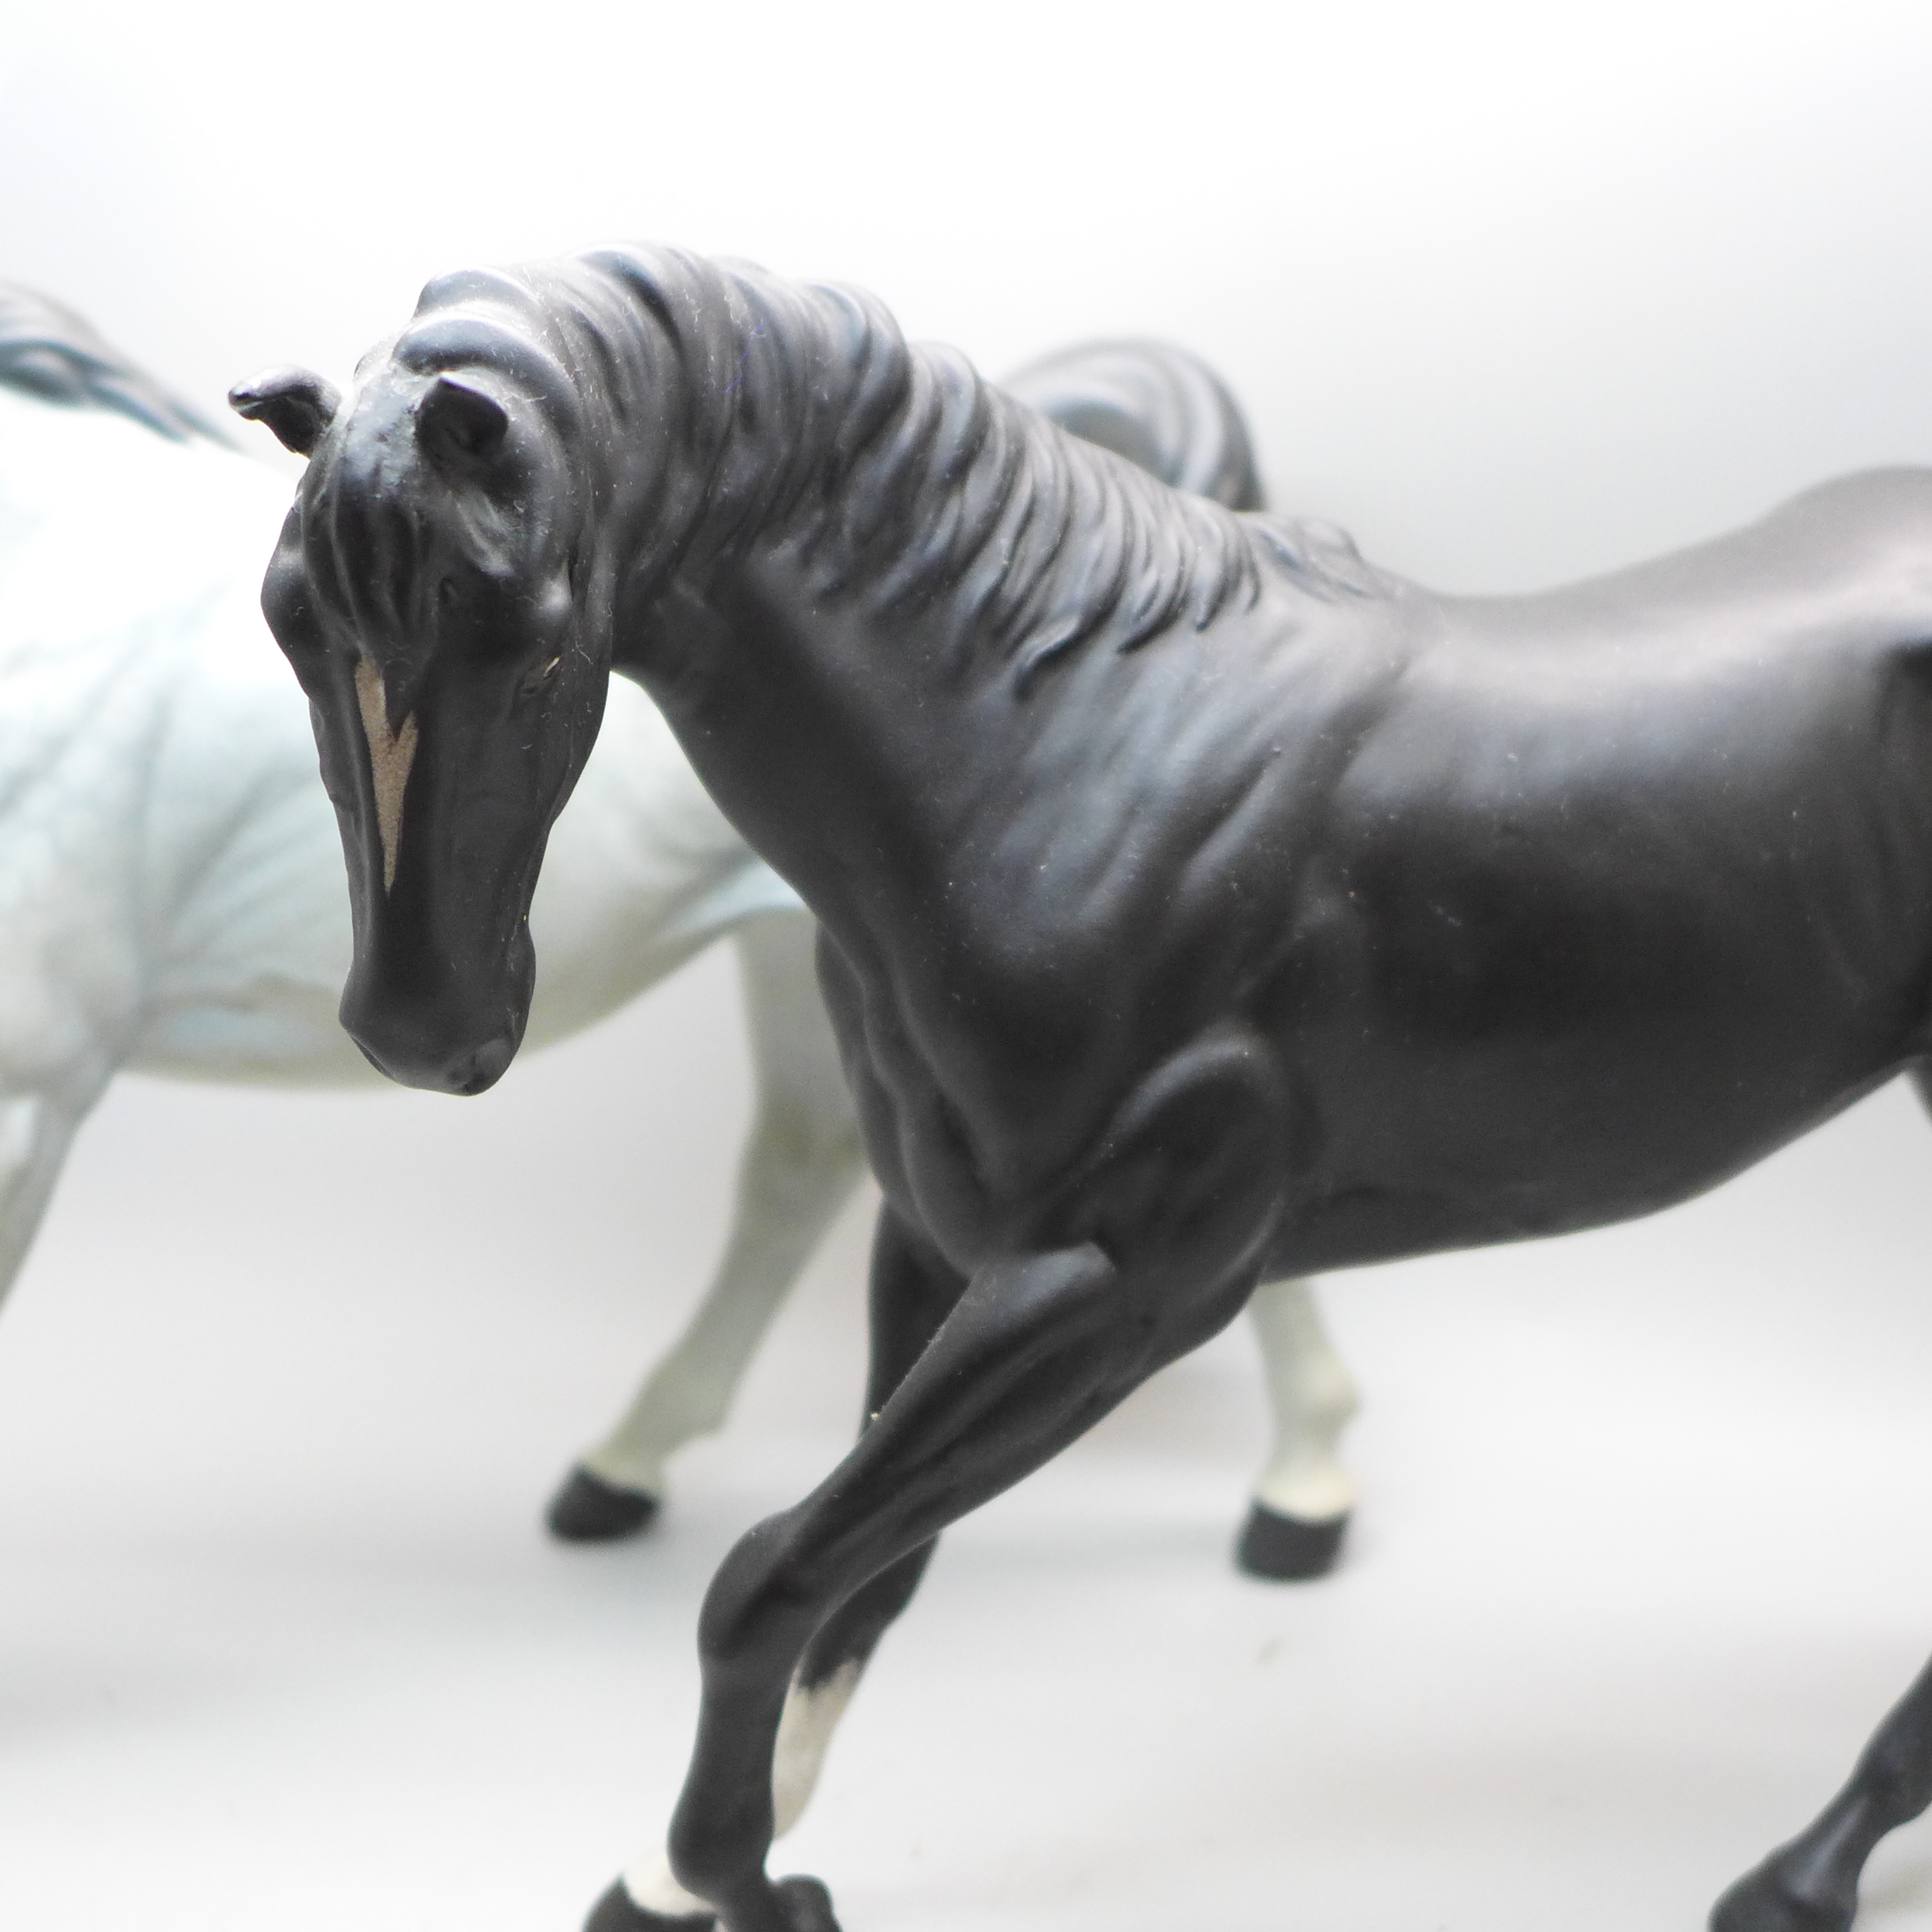 Two Beswick horse figures, hind leg on black horse restored - Image 3 of 6